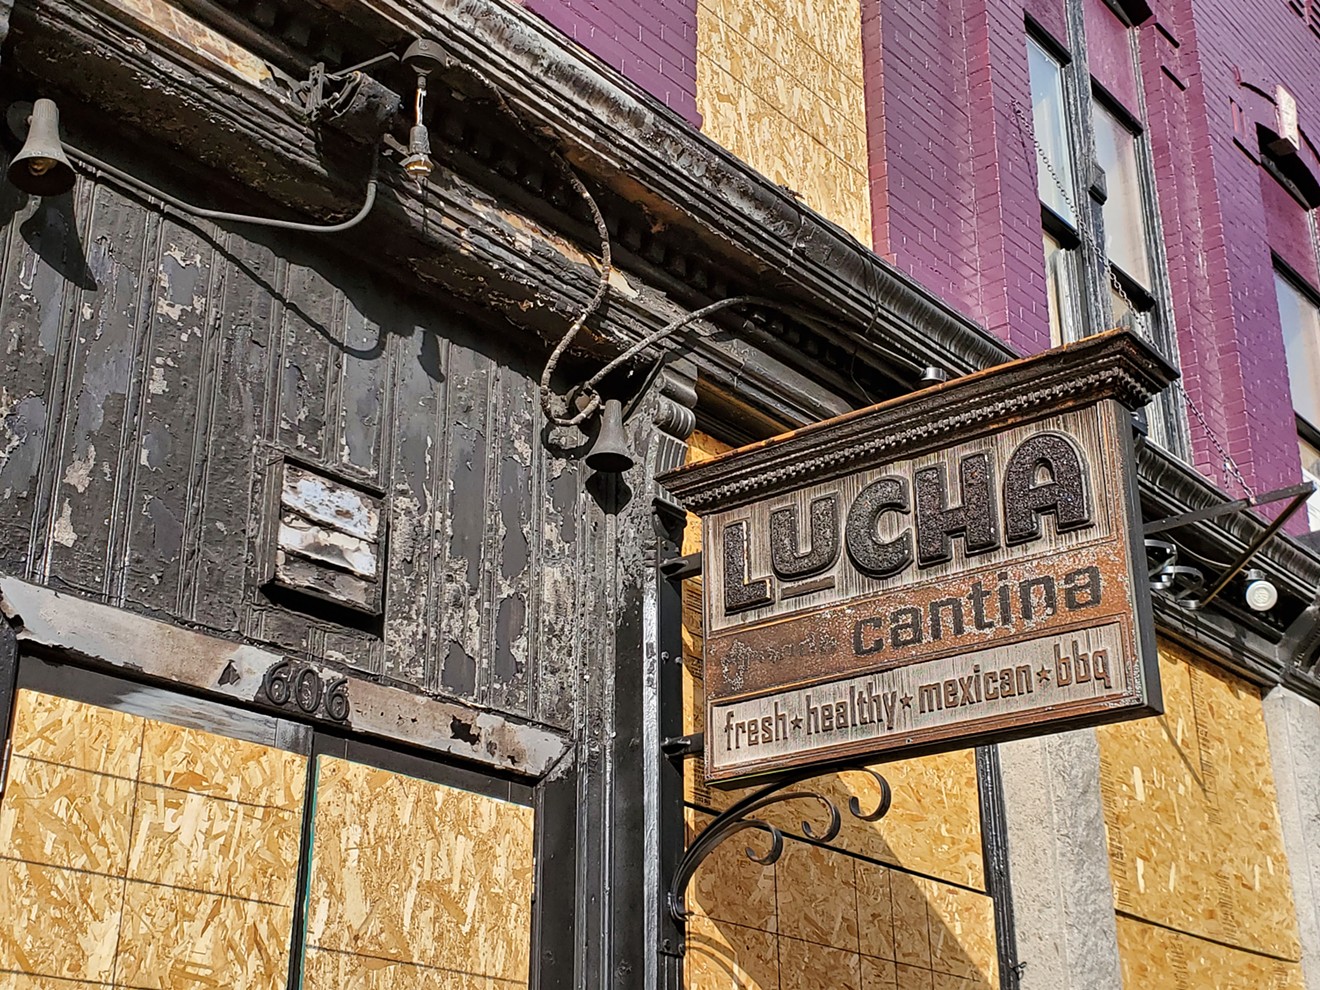 Fire destroyed the dining room of Lucha Cantina but the sign remains.